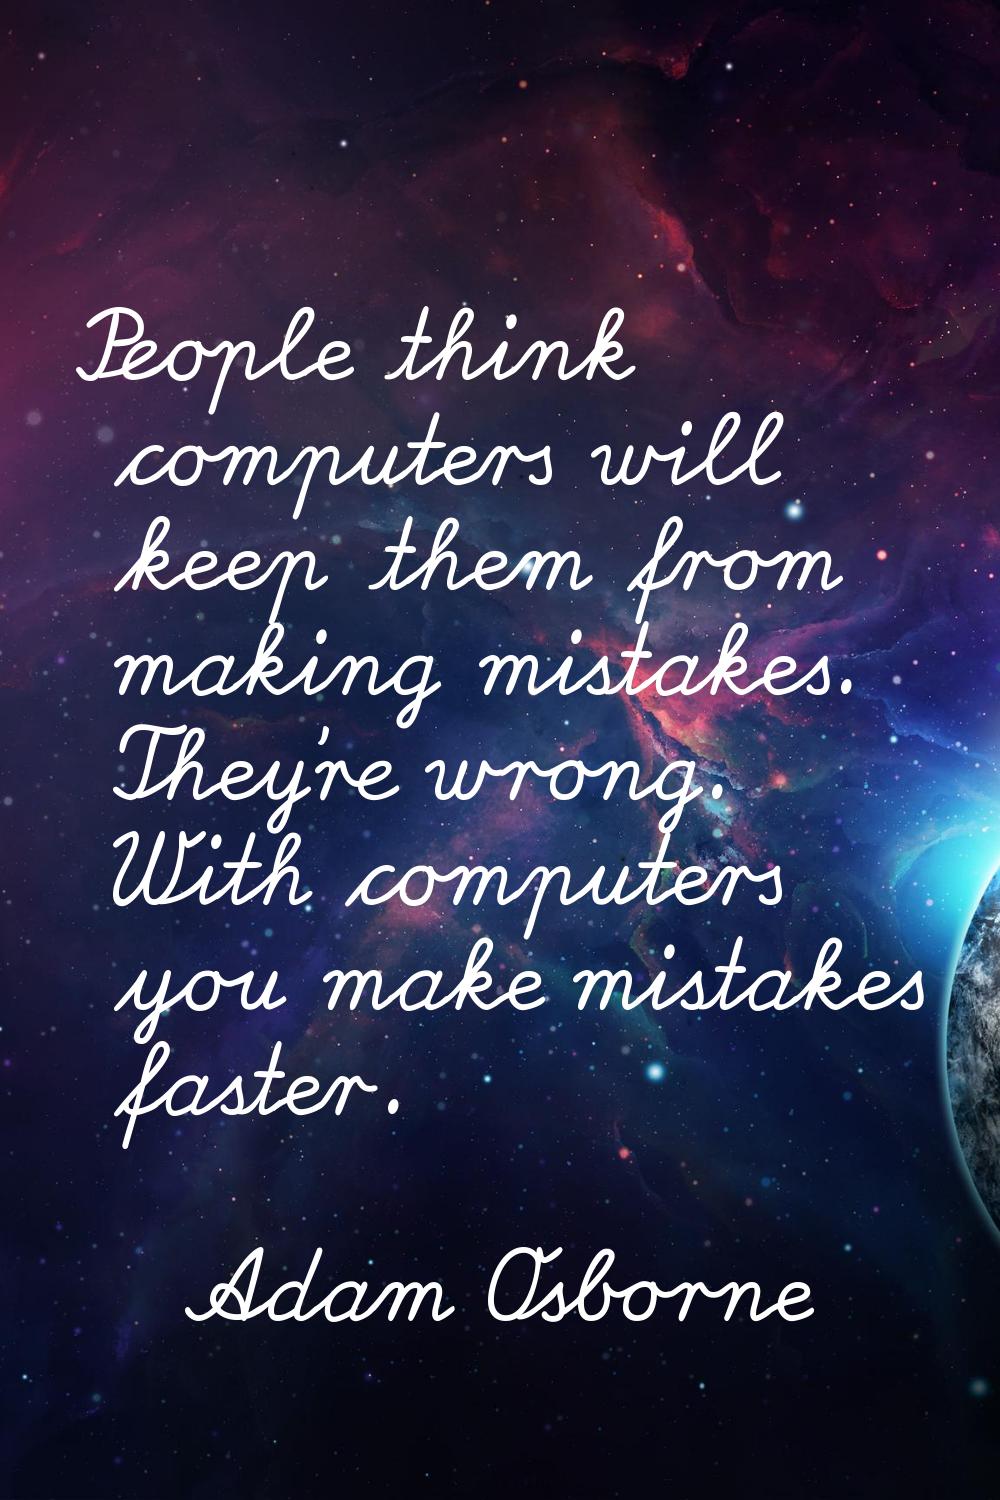 People think computers will keep them from making mistakes. They're wrong. With computers you make 